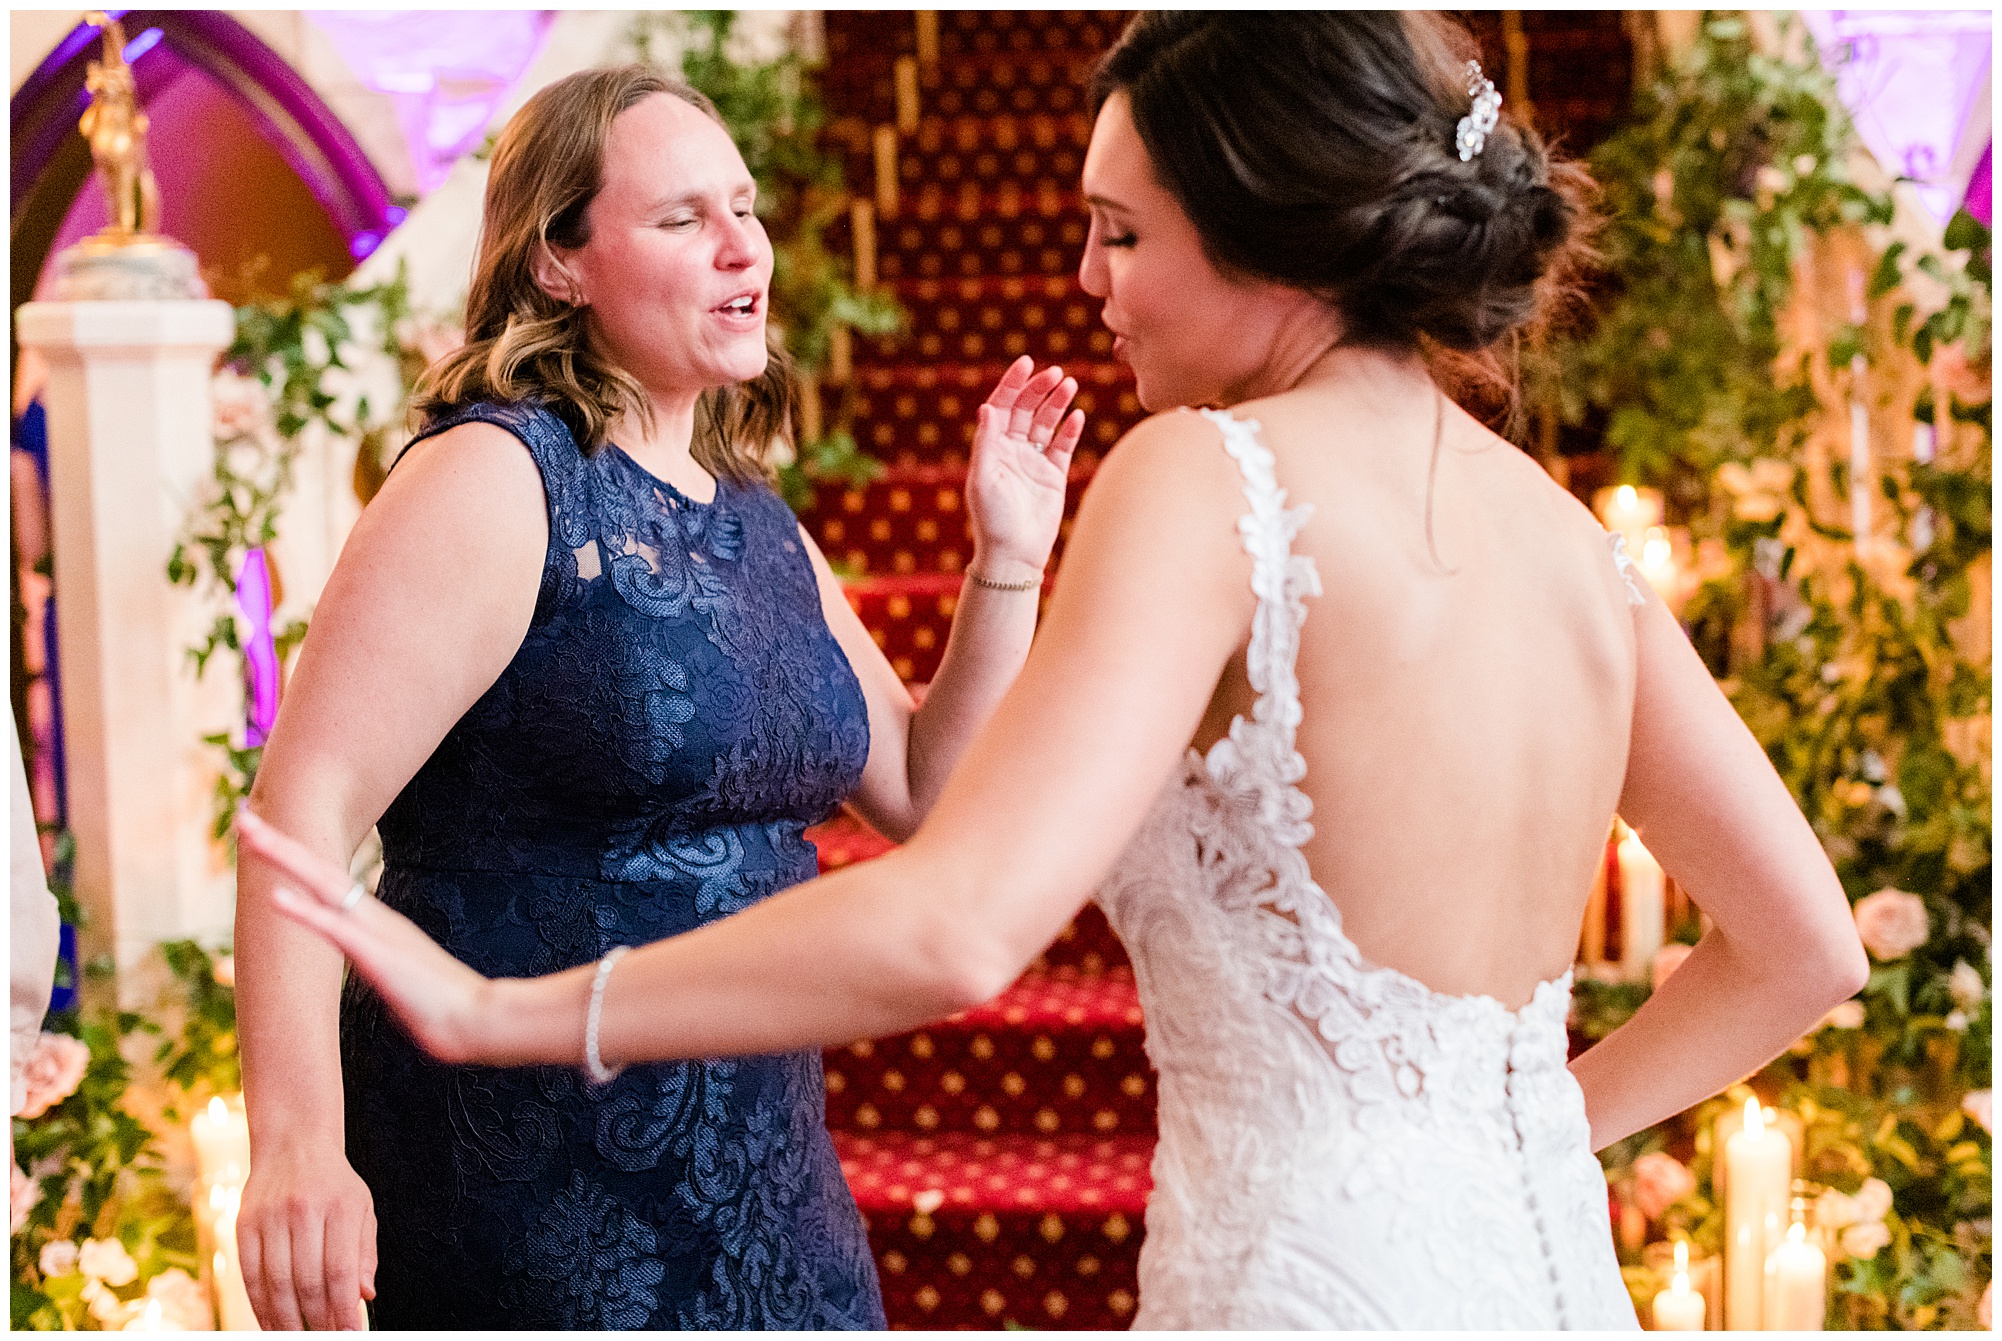 people dancing at dover hall wedding reception. by rva wedding photographer, sarah & dave photography.